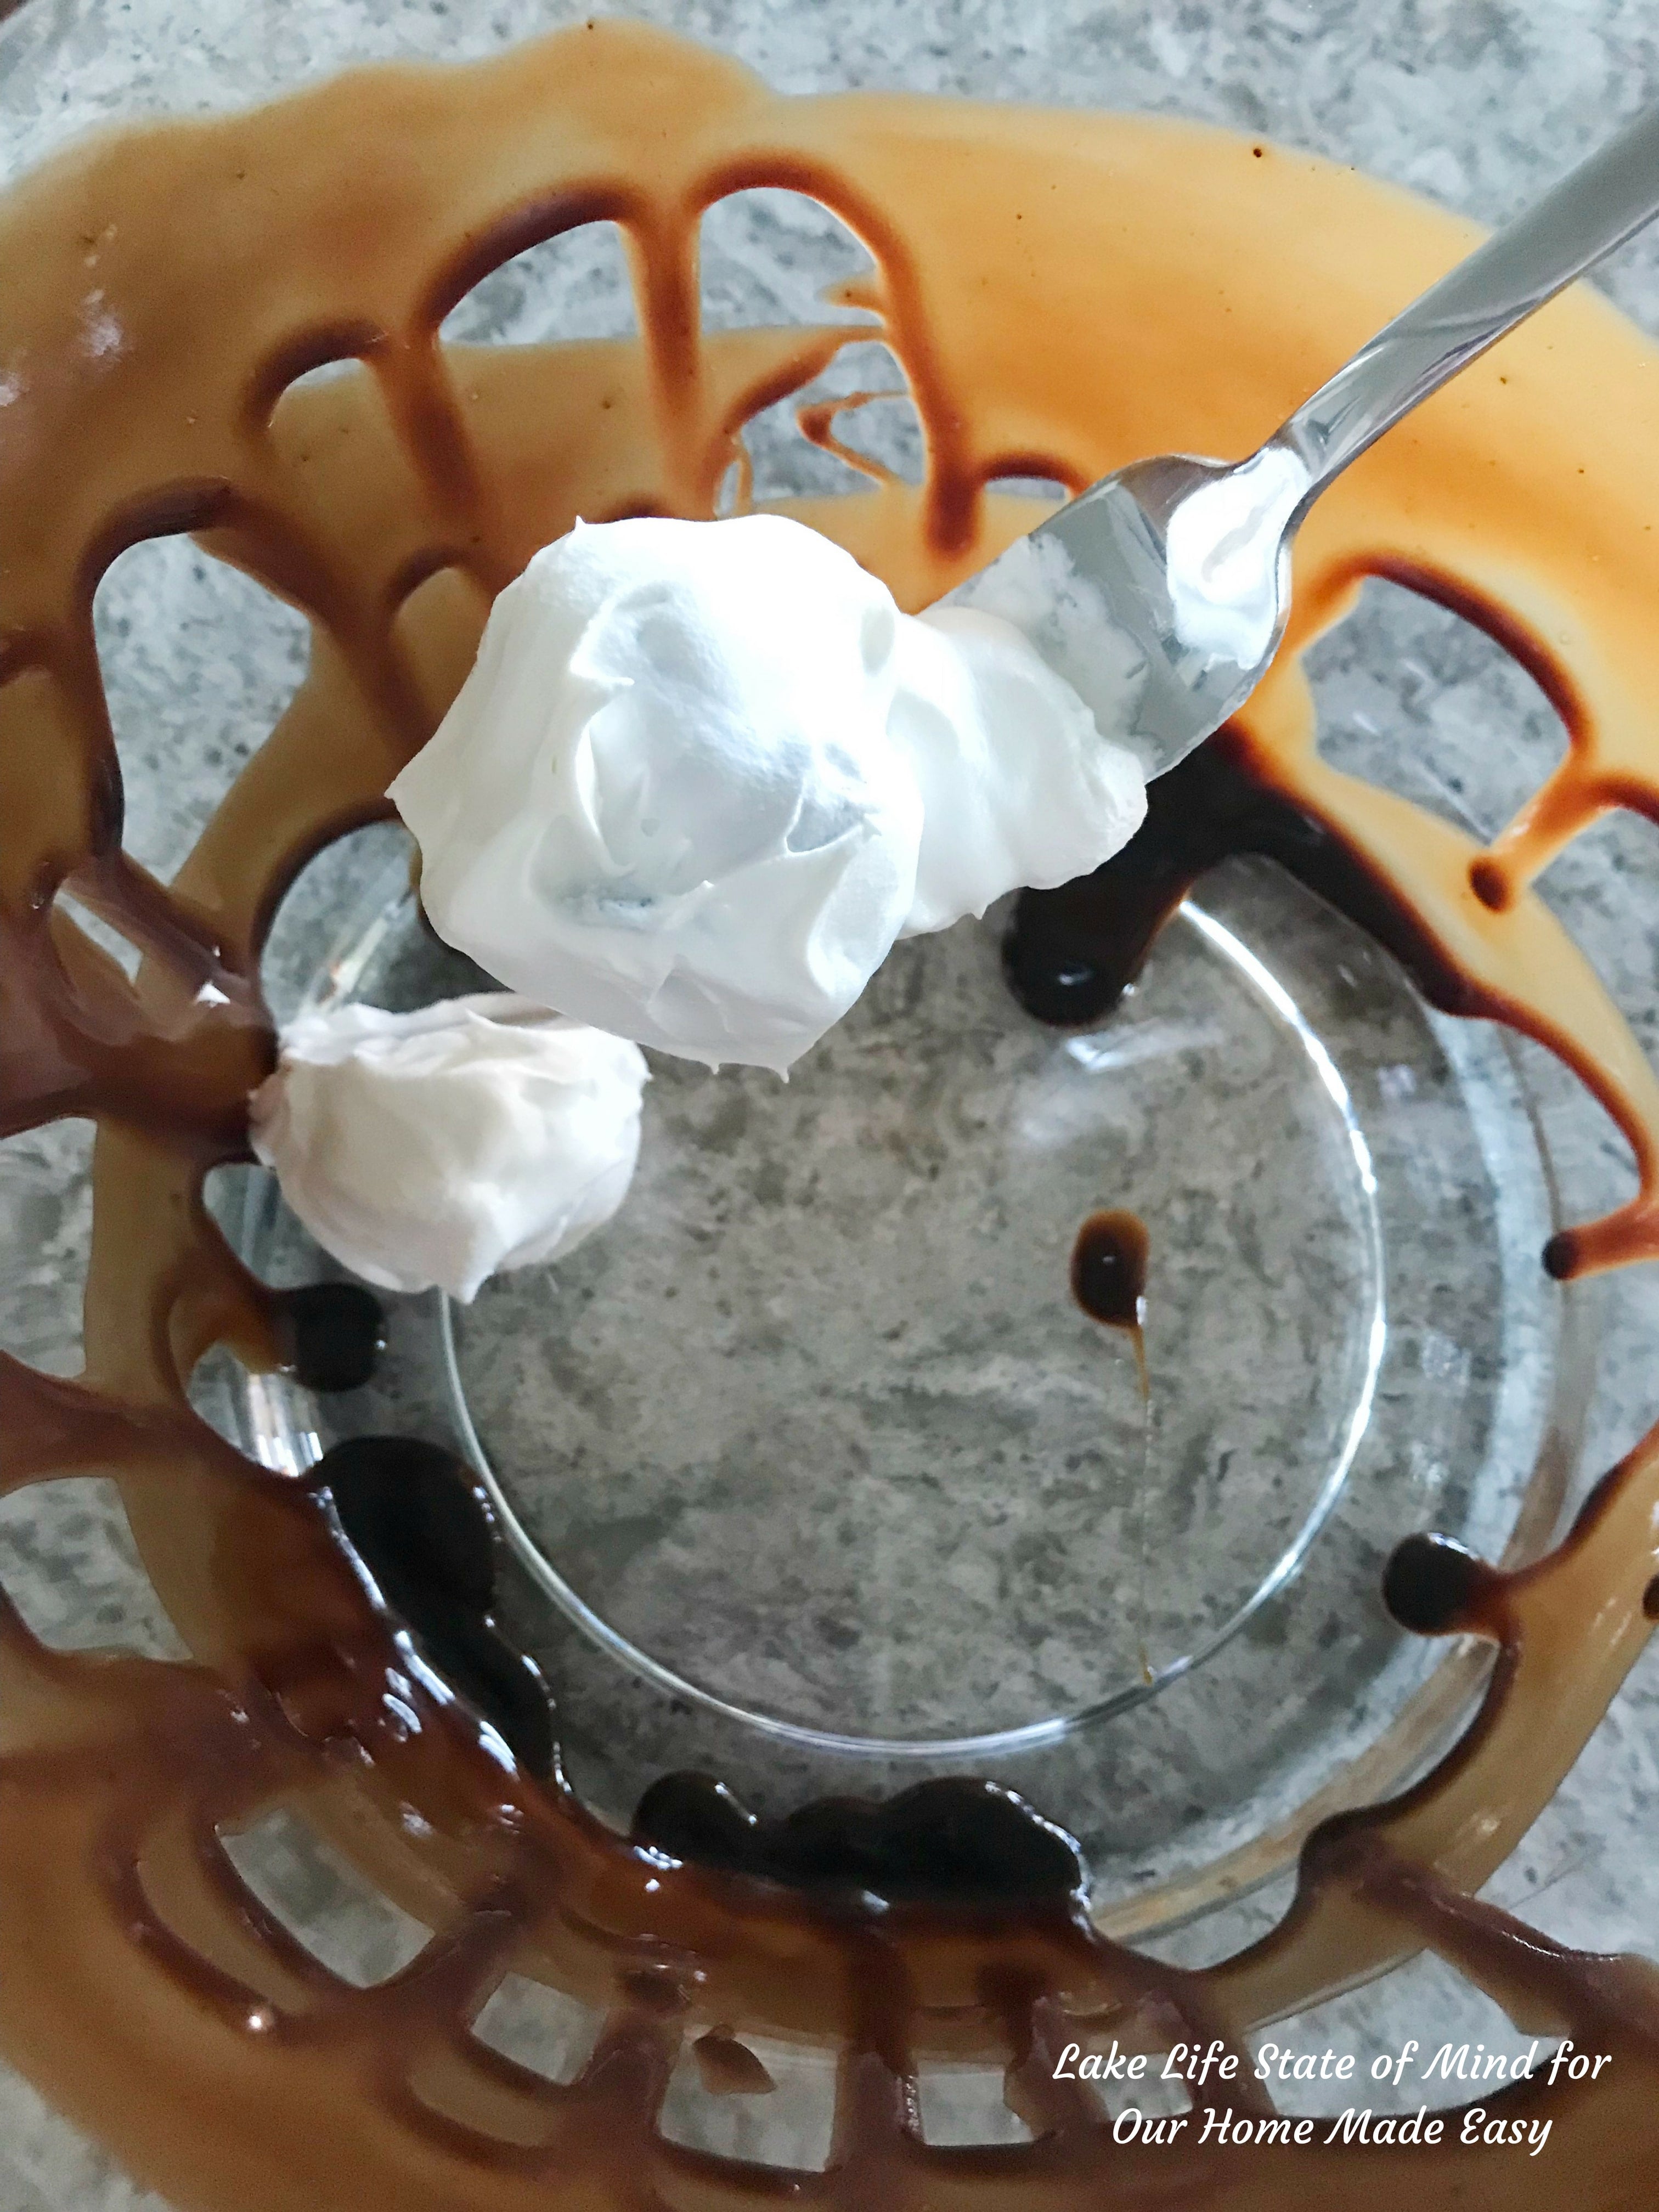 Layer the whipped topping in the bowl with chocolate syrup